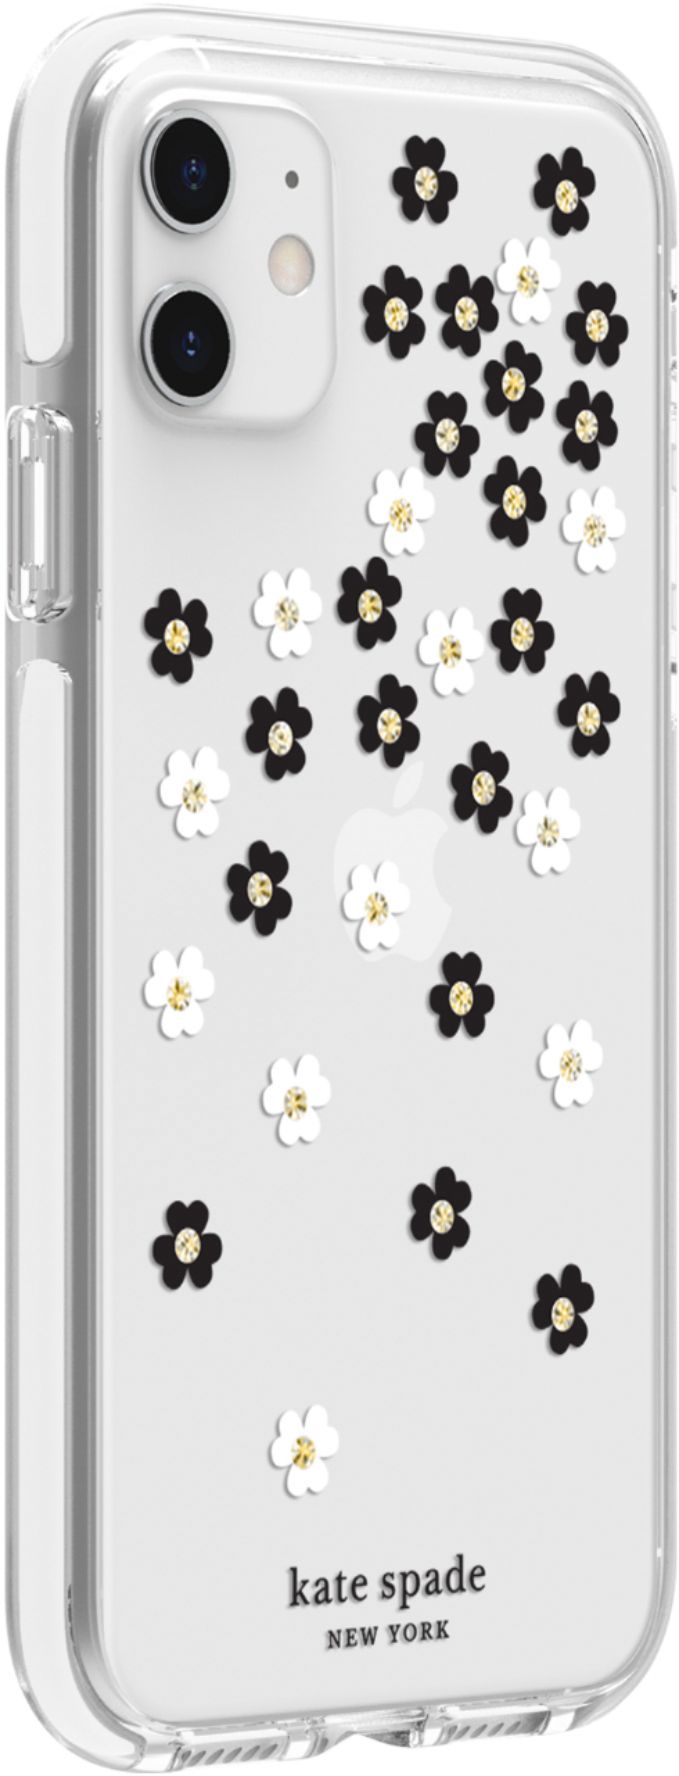 Angle View: kate spade new york - Defensive Hardshell Case for Apple® iPhone® 11 - White/Clear/Scattered Flowers Black/Gold Gems